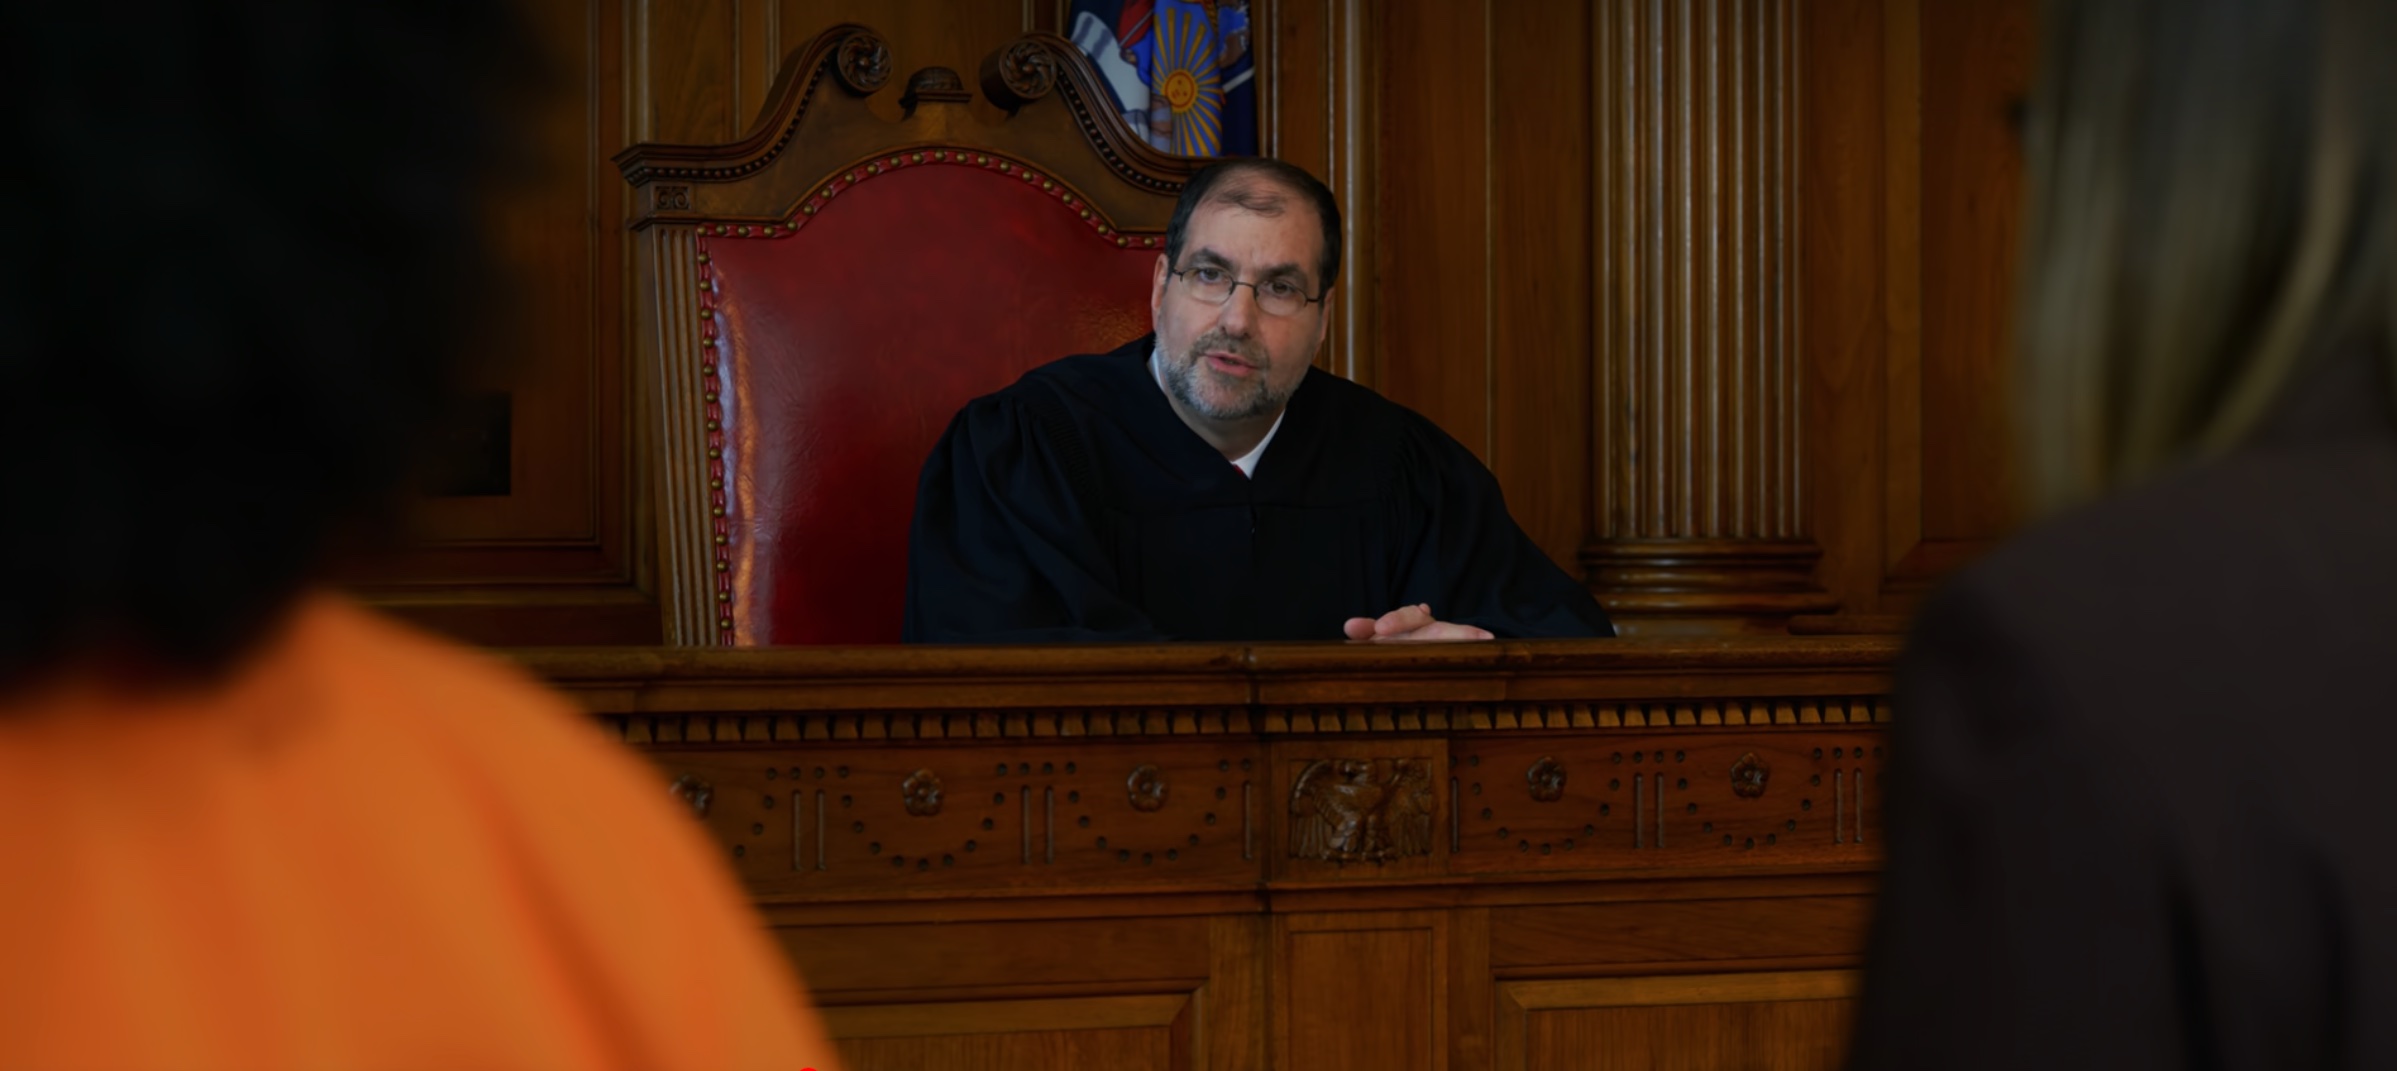 Cantor Philip Sherman played a judge on a 2018 episode of “Orange is the New Black.” (Netflix)